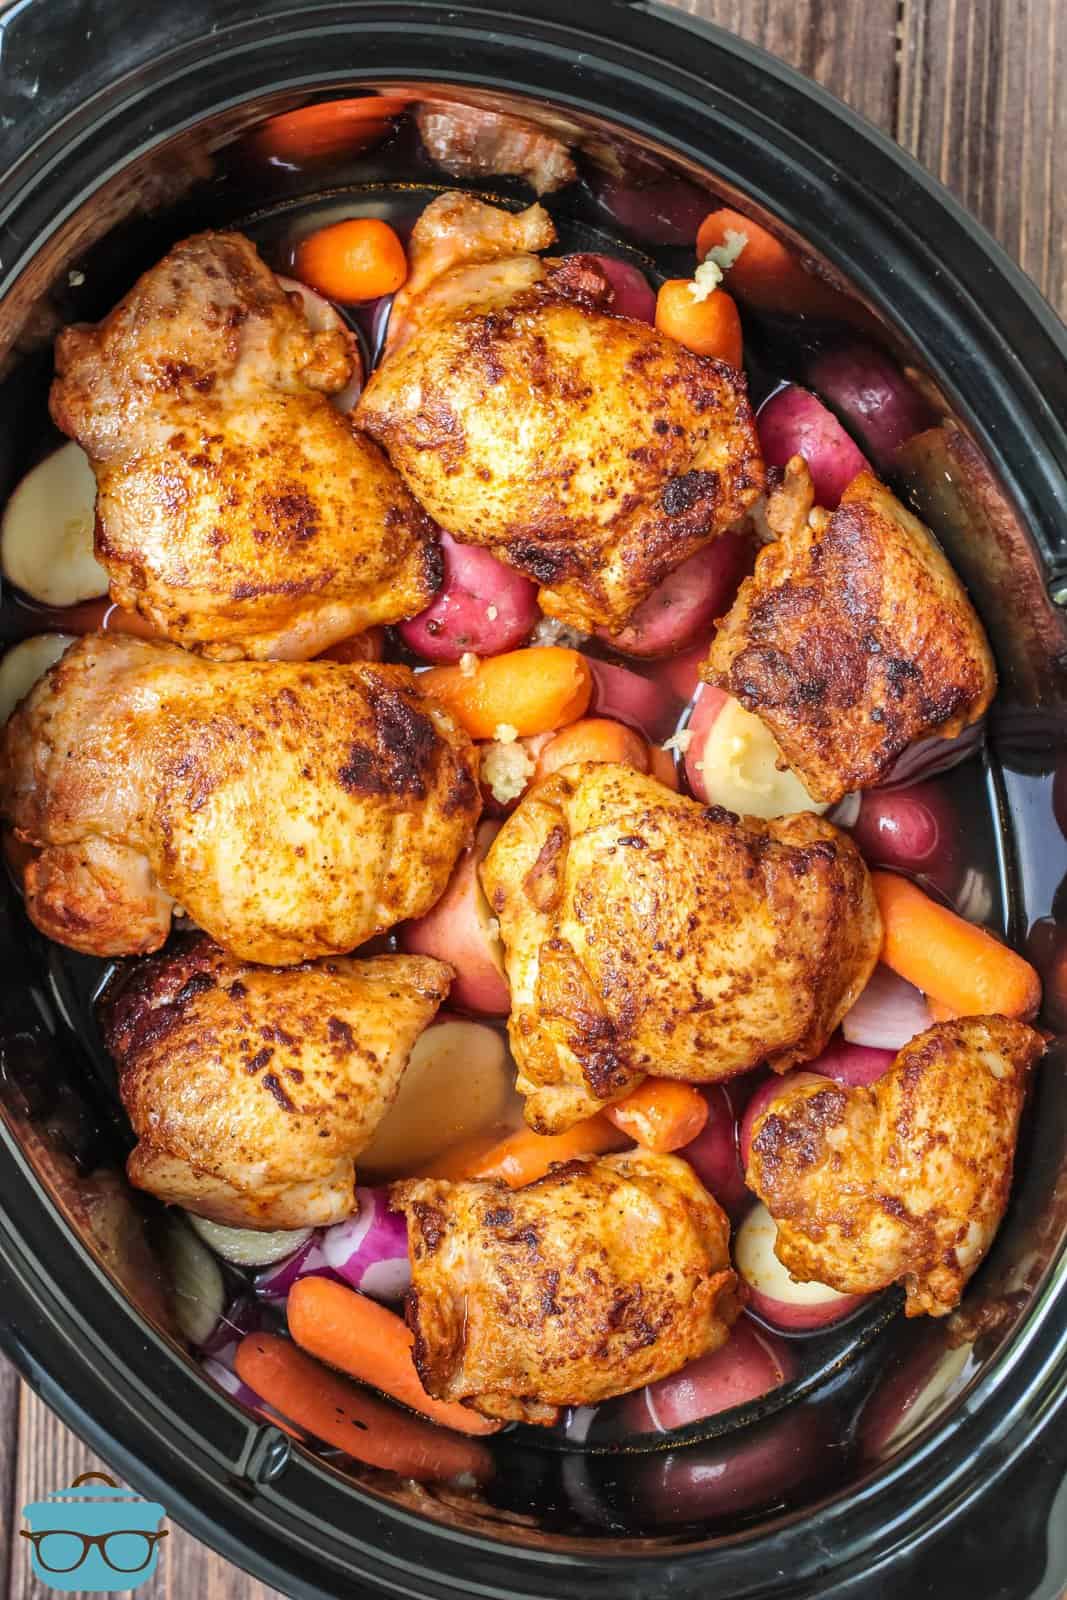 Chicken added to top of vegetables with stock added.